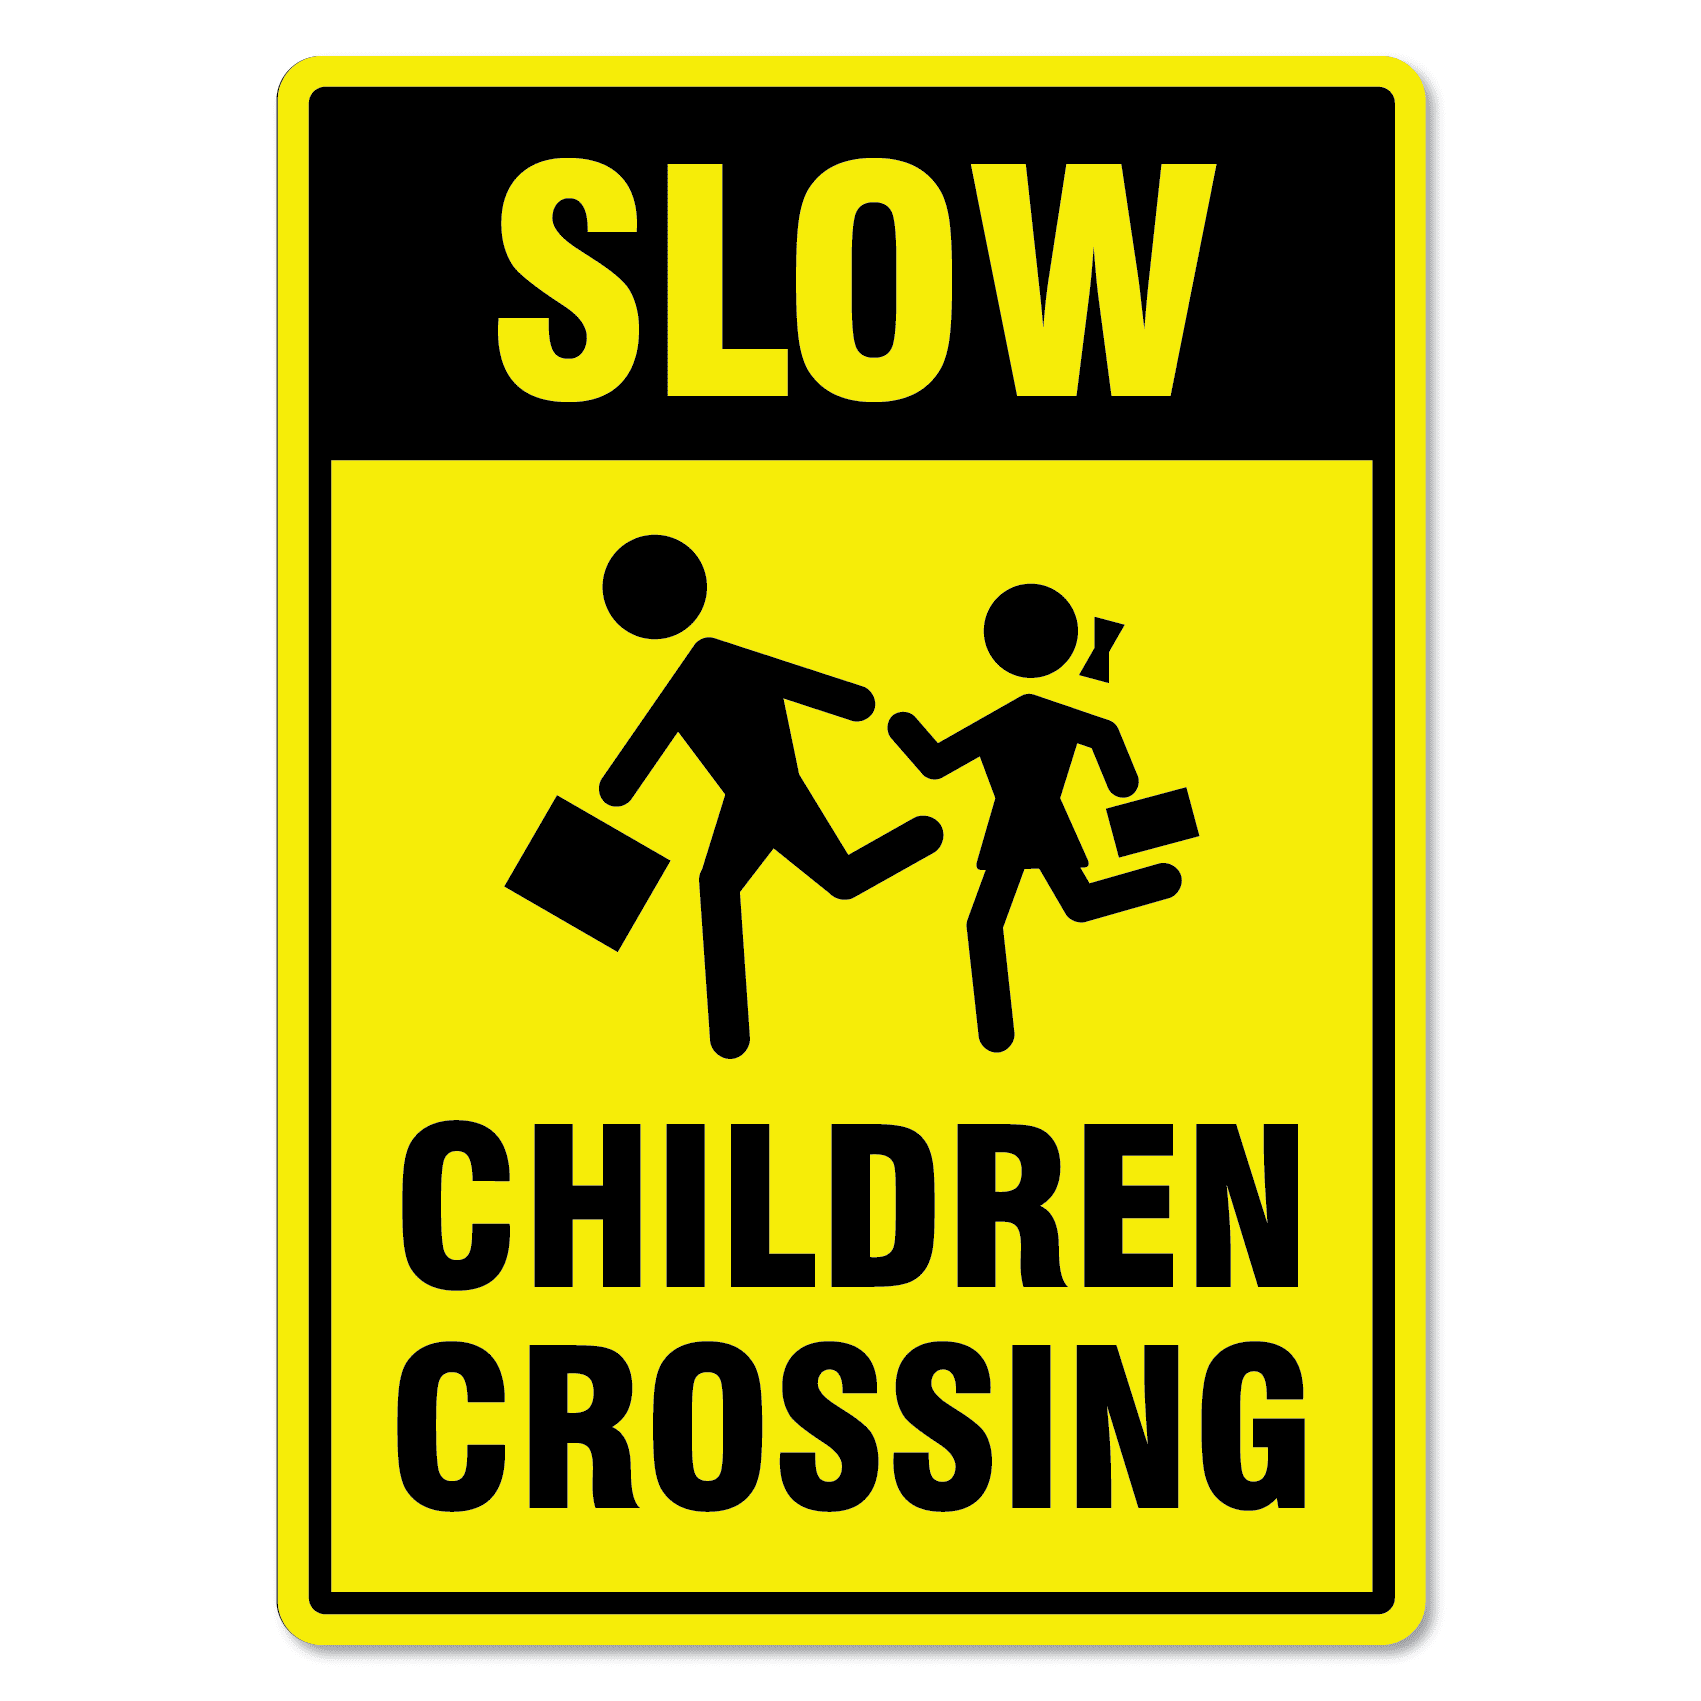 Pedestrian Crossing Sign - - TreeTop Products